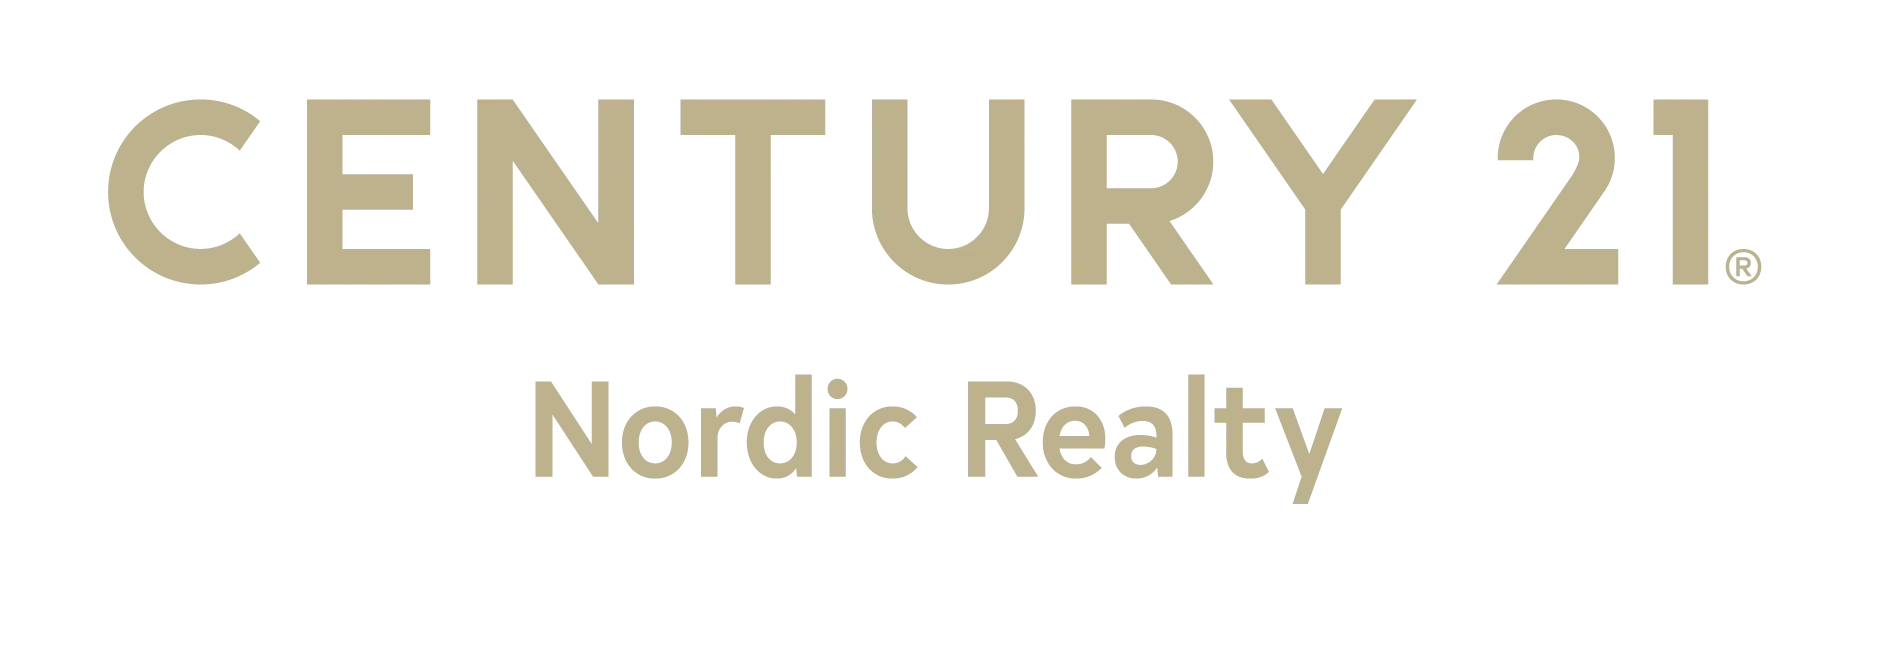 A black and white image of the word futurity.